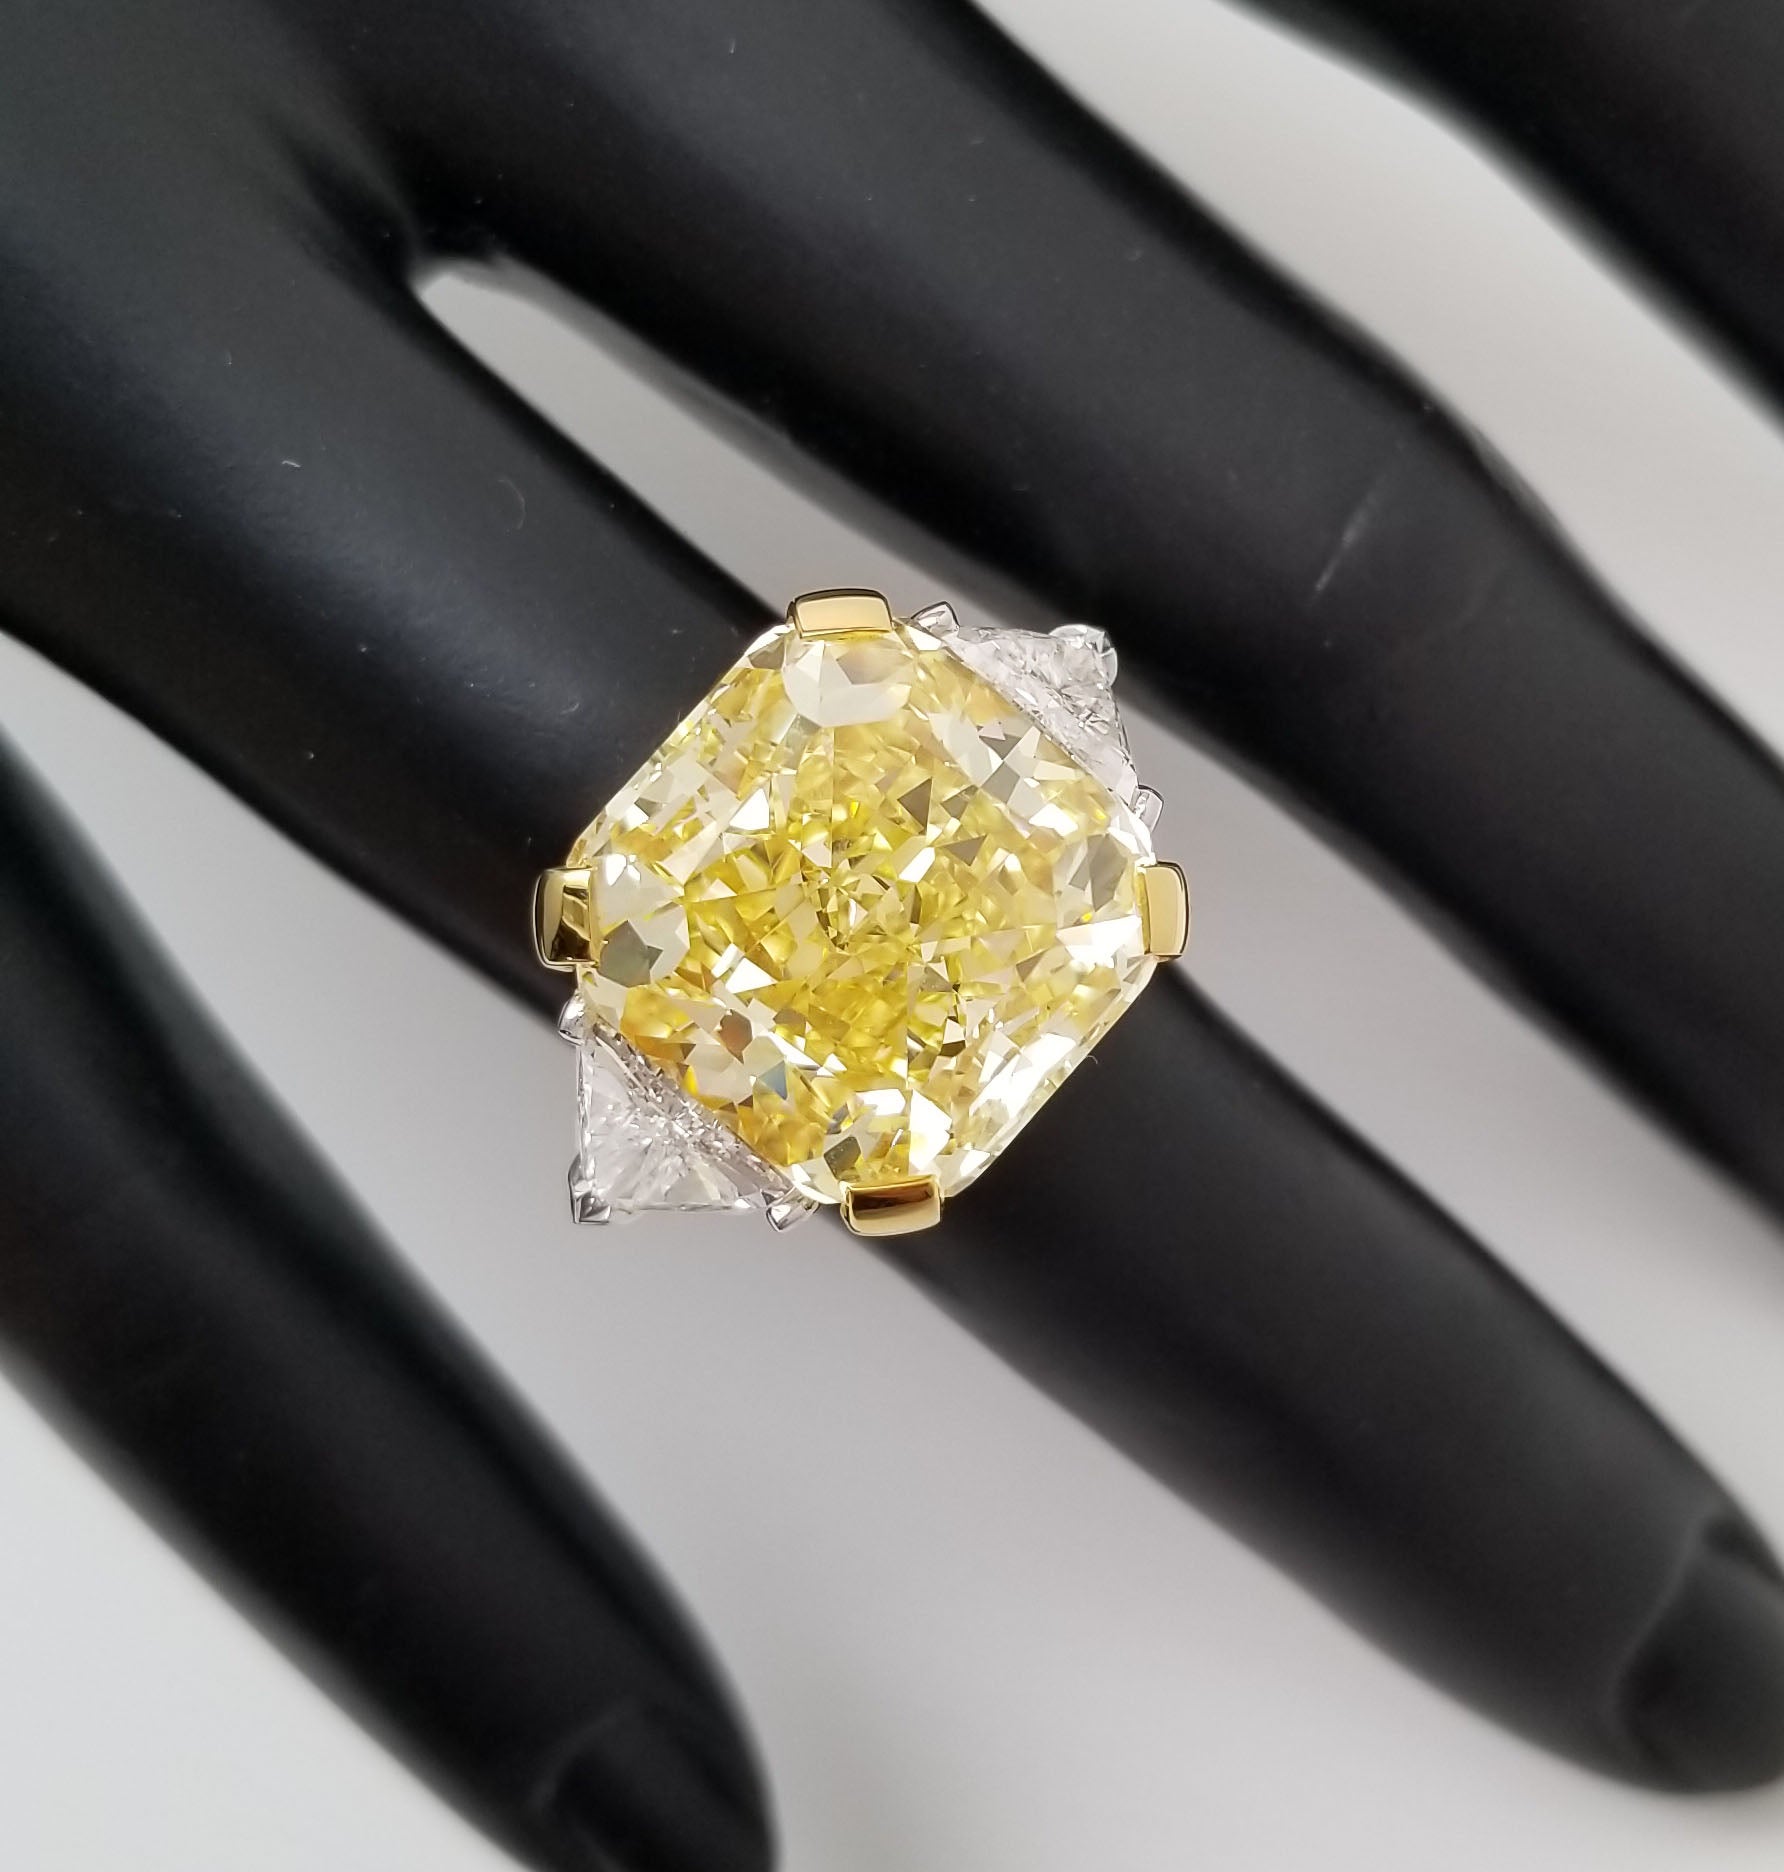 20 Ct Fancy Intense Yellow Diamond GIA Radiant Cut Three Stone Engagement Ring For Sale